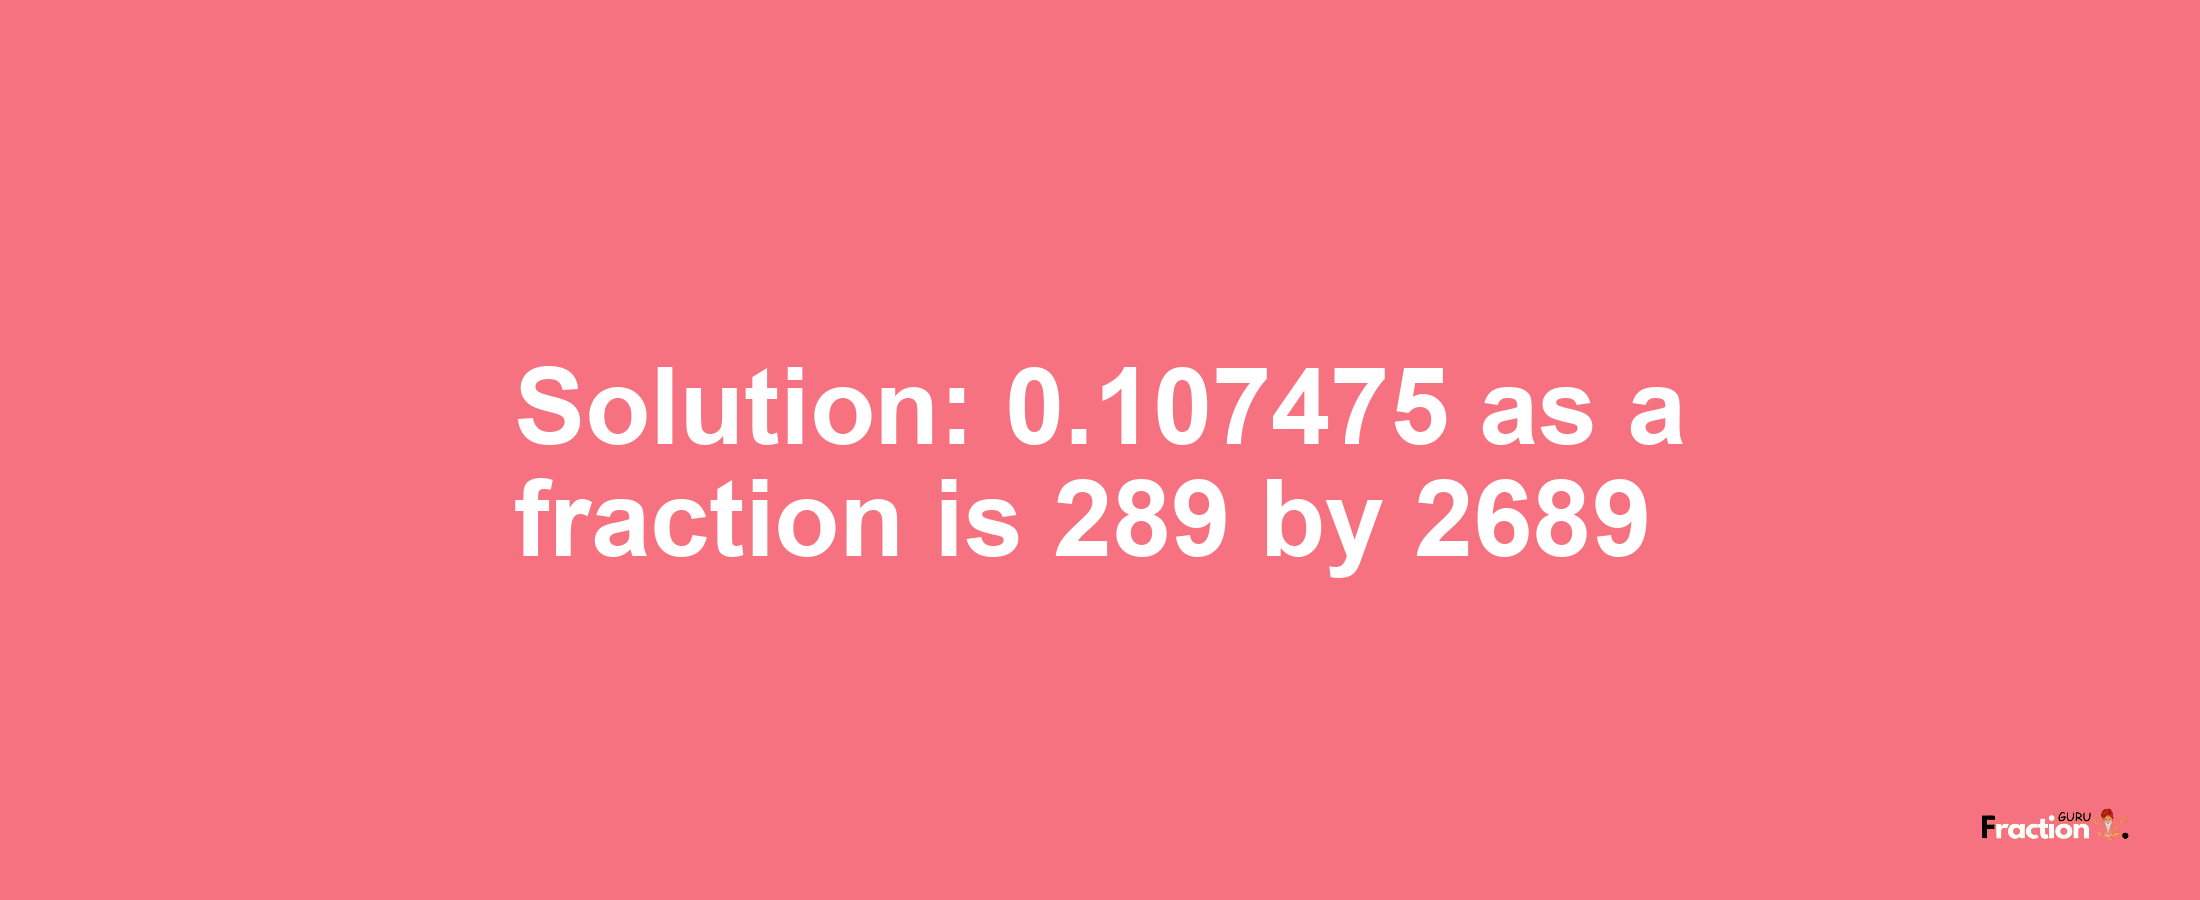 Solution:0.107475 as a fraction is 289/2689